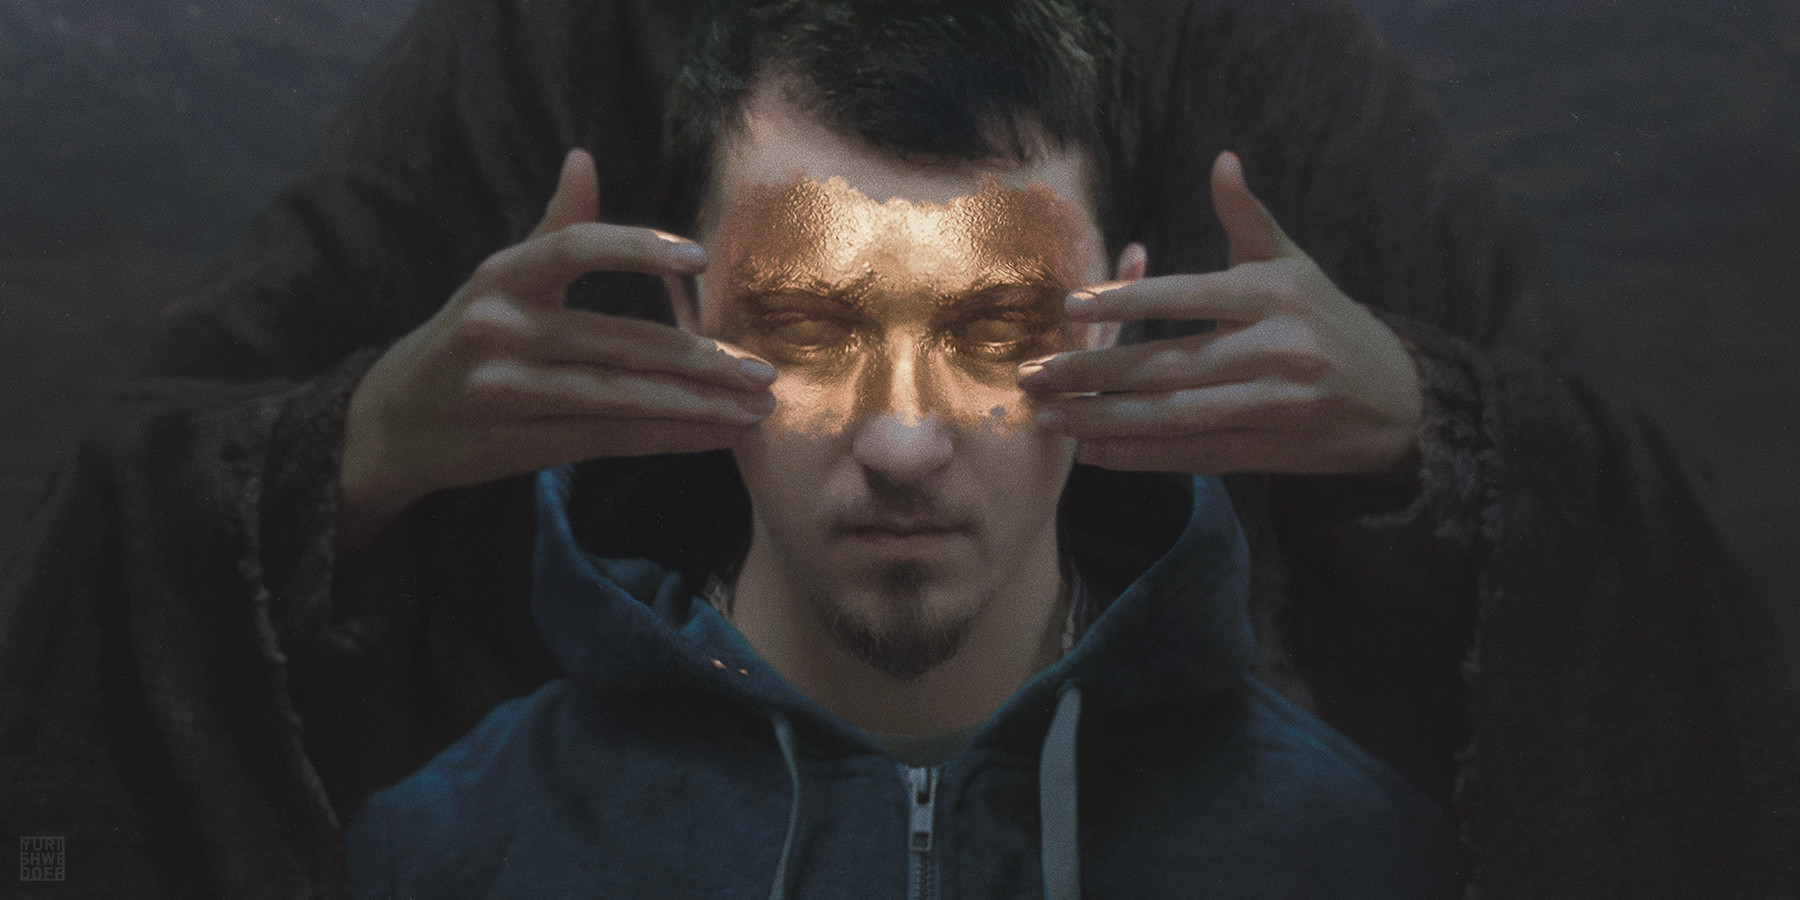 [Reflexion] Les oeuvres qui vous inspirent - Page 2 Yuri-shwedoff-gold-image